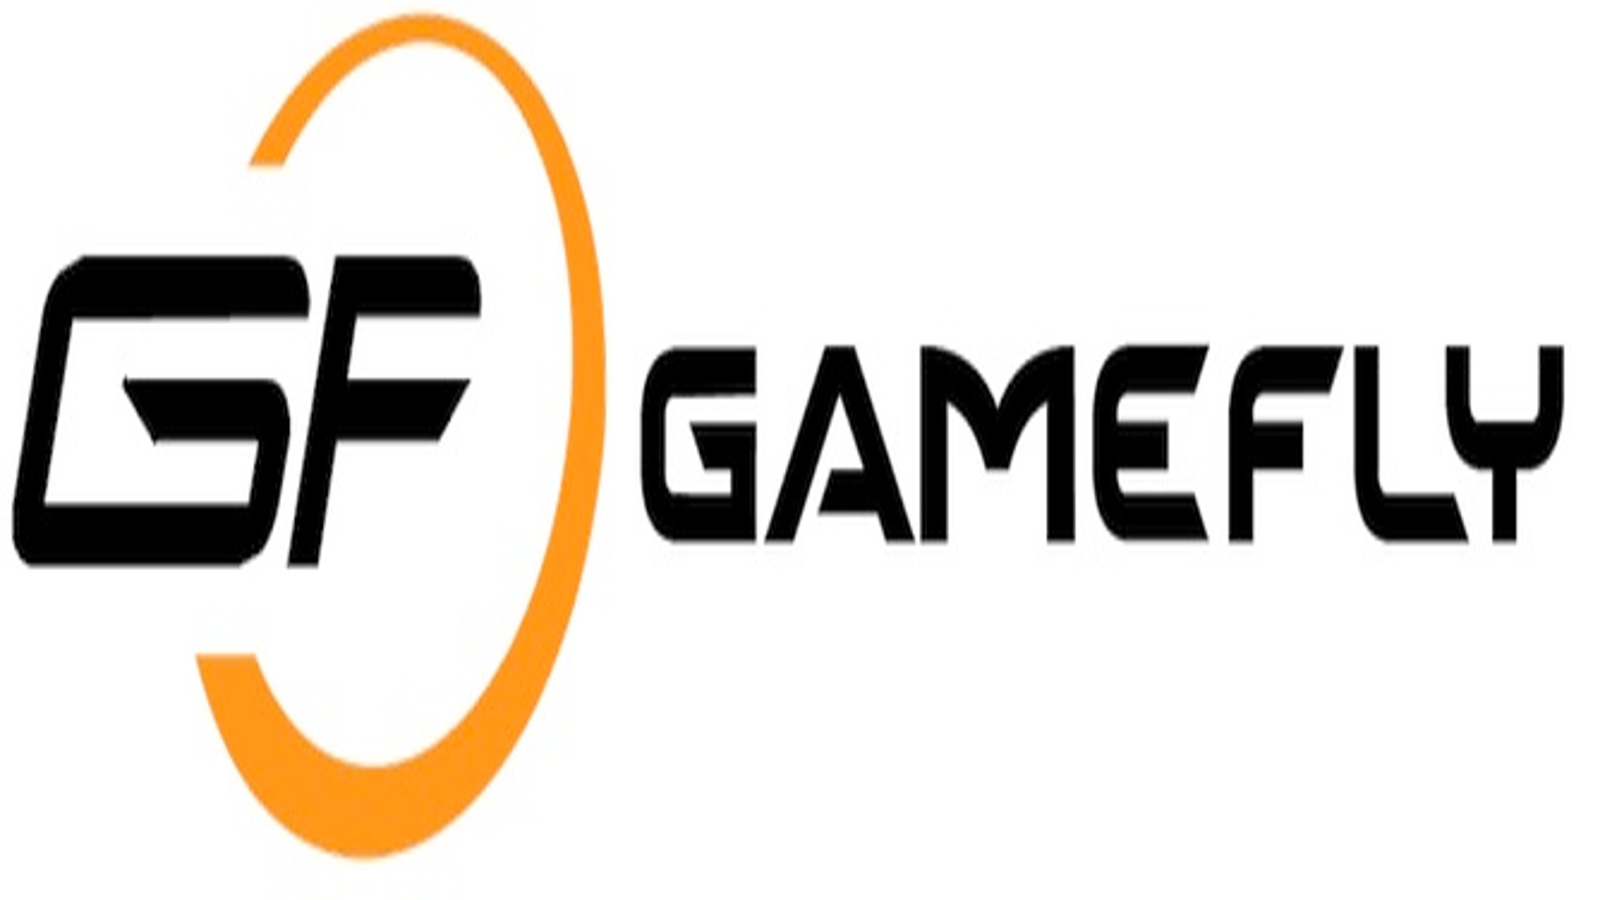 Gamefly launches Digital store, discounts 2K games